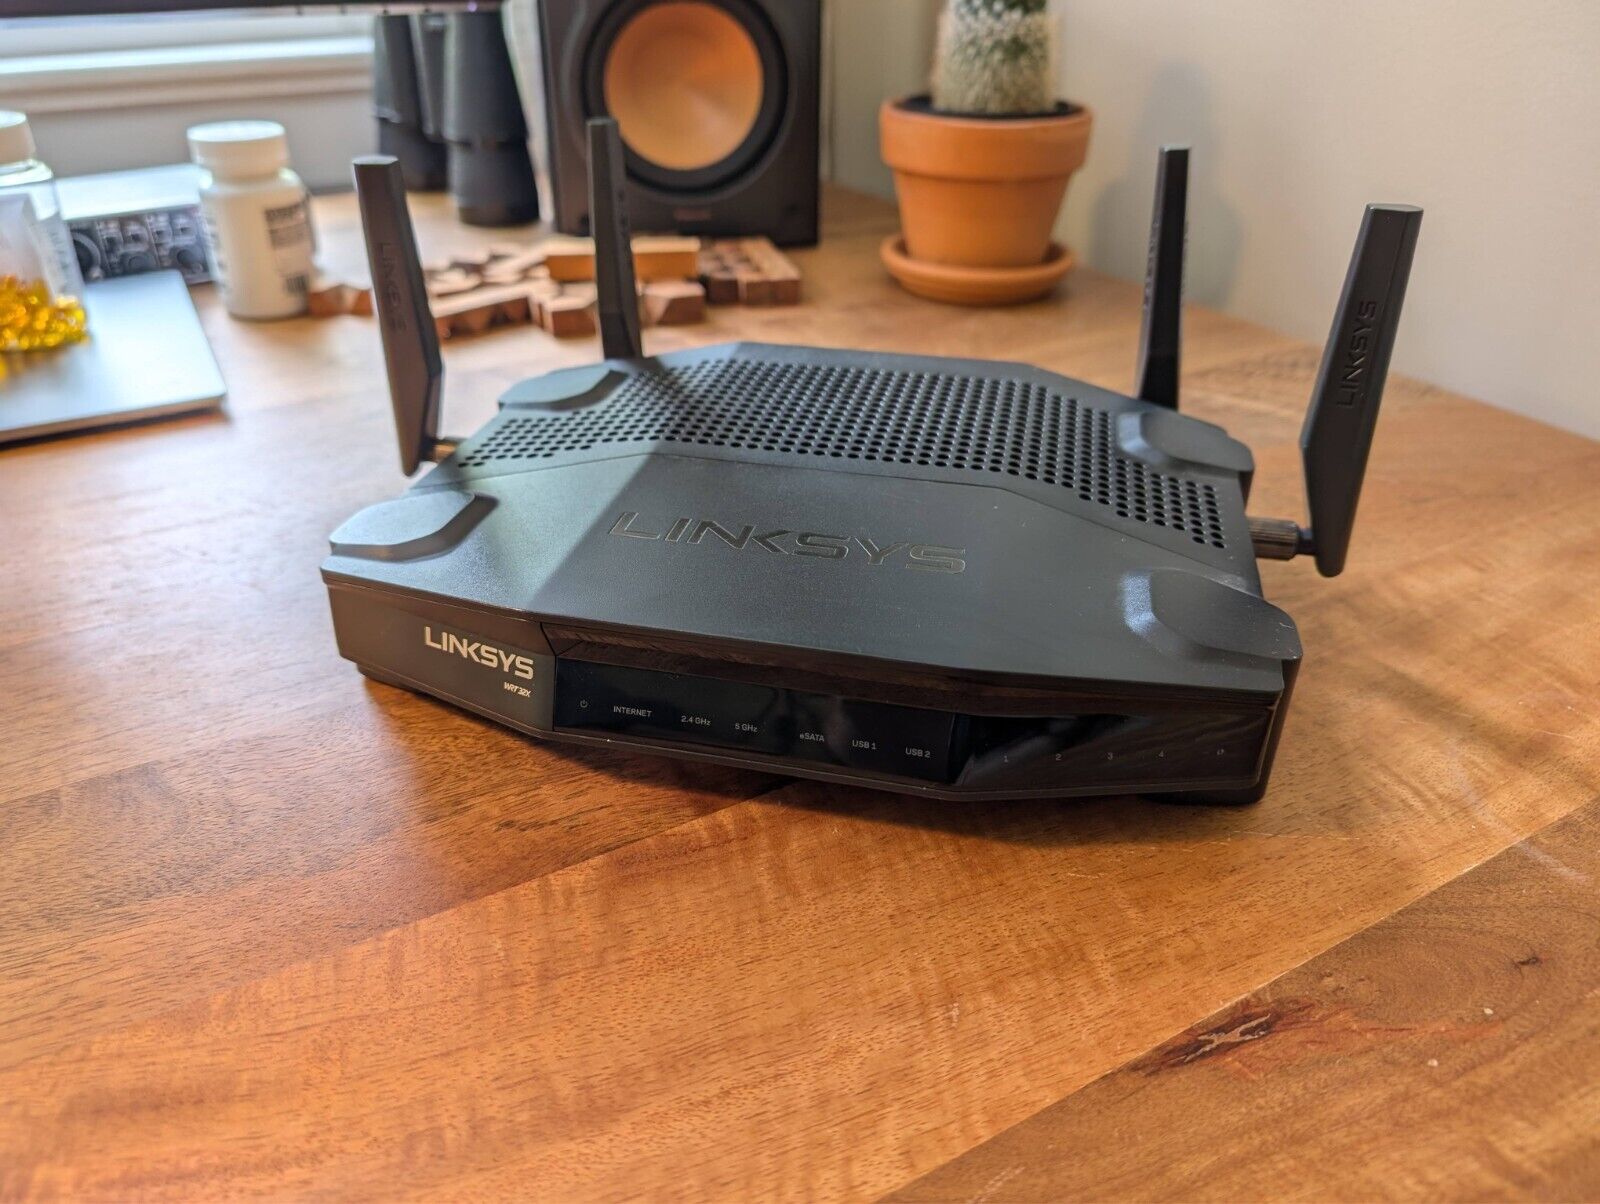 Linksys WRT32X Dual Band Router with OpenWRT